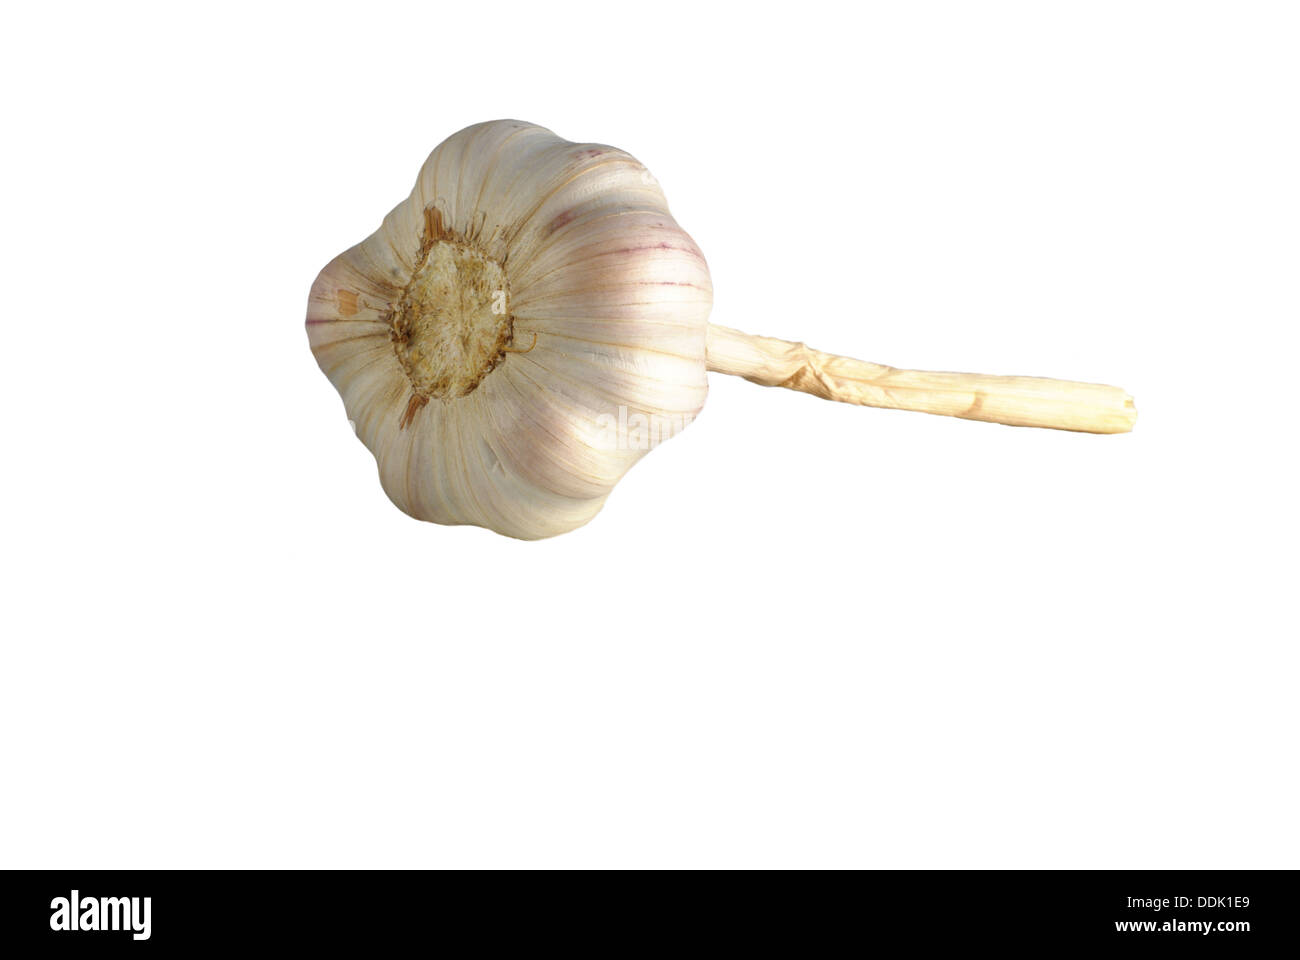 the garlic from remainder of stem on white background Stock Photo